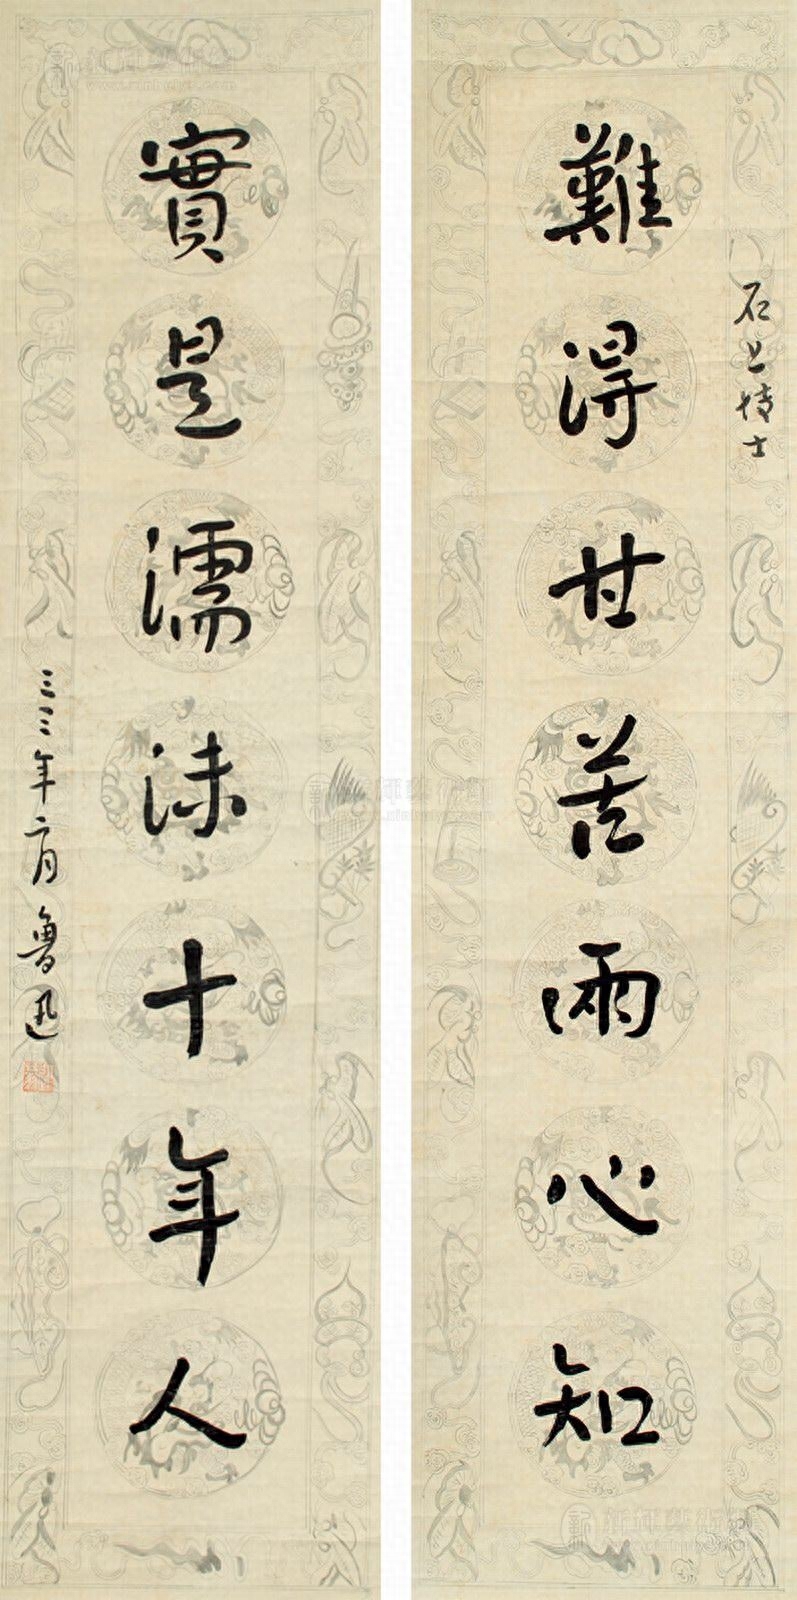 Mr. Lu Xun’s calligraphy is soft yet strong